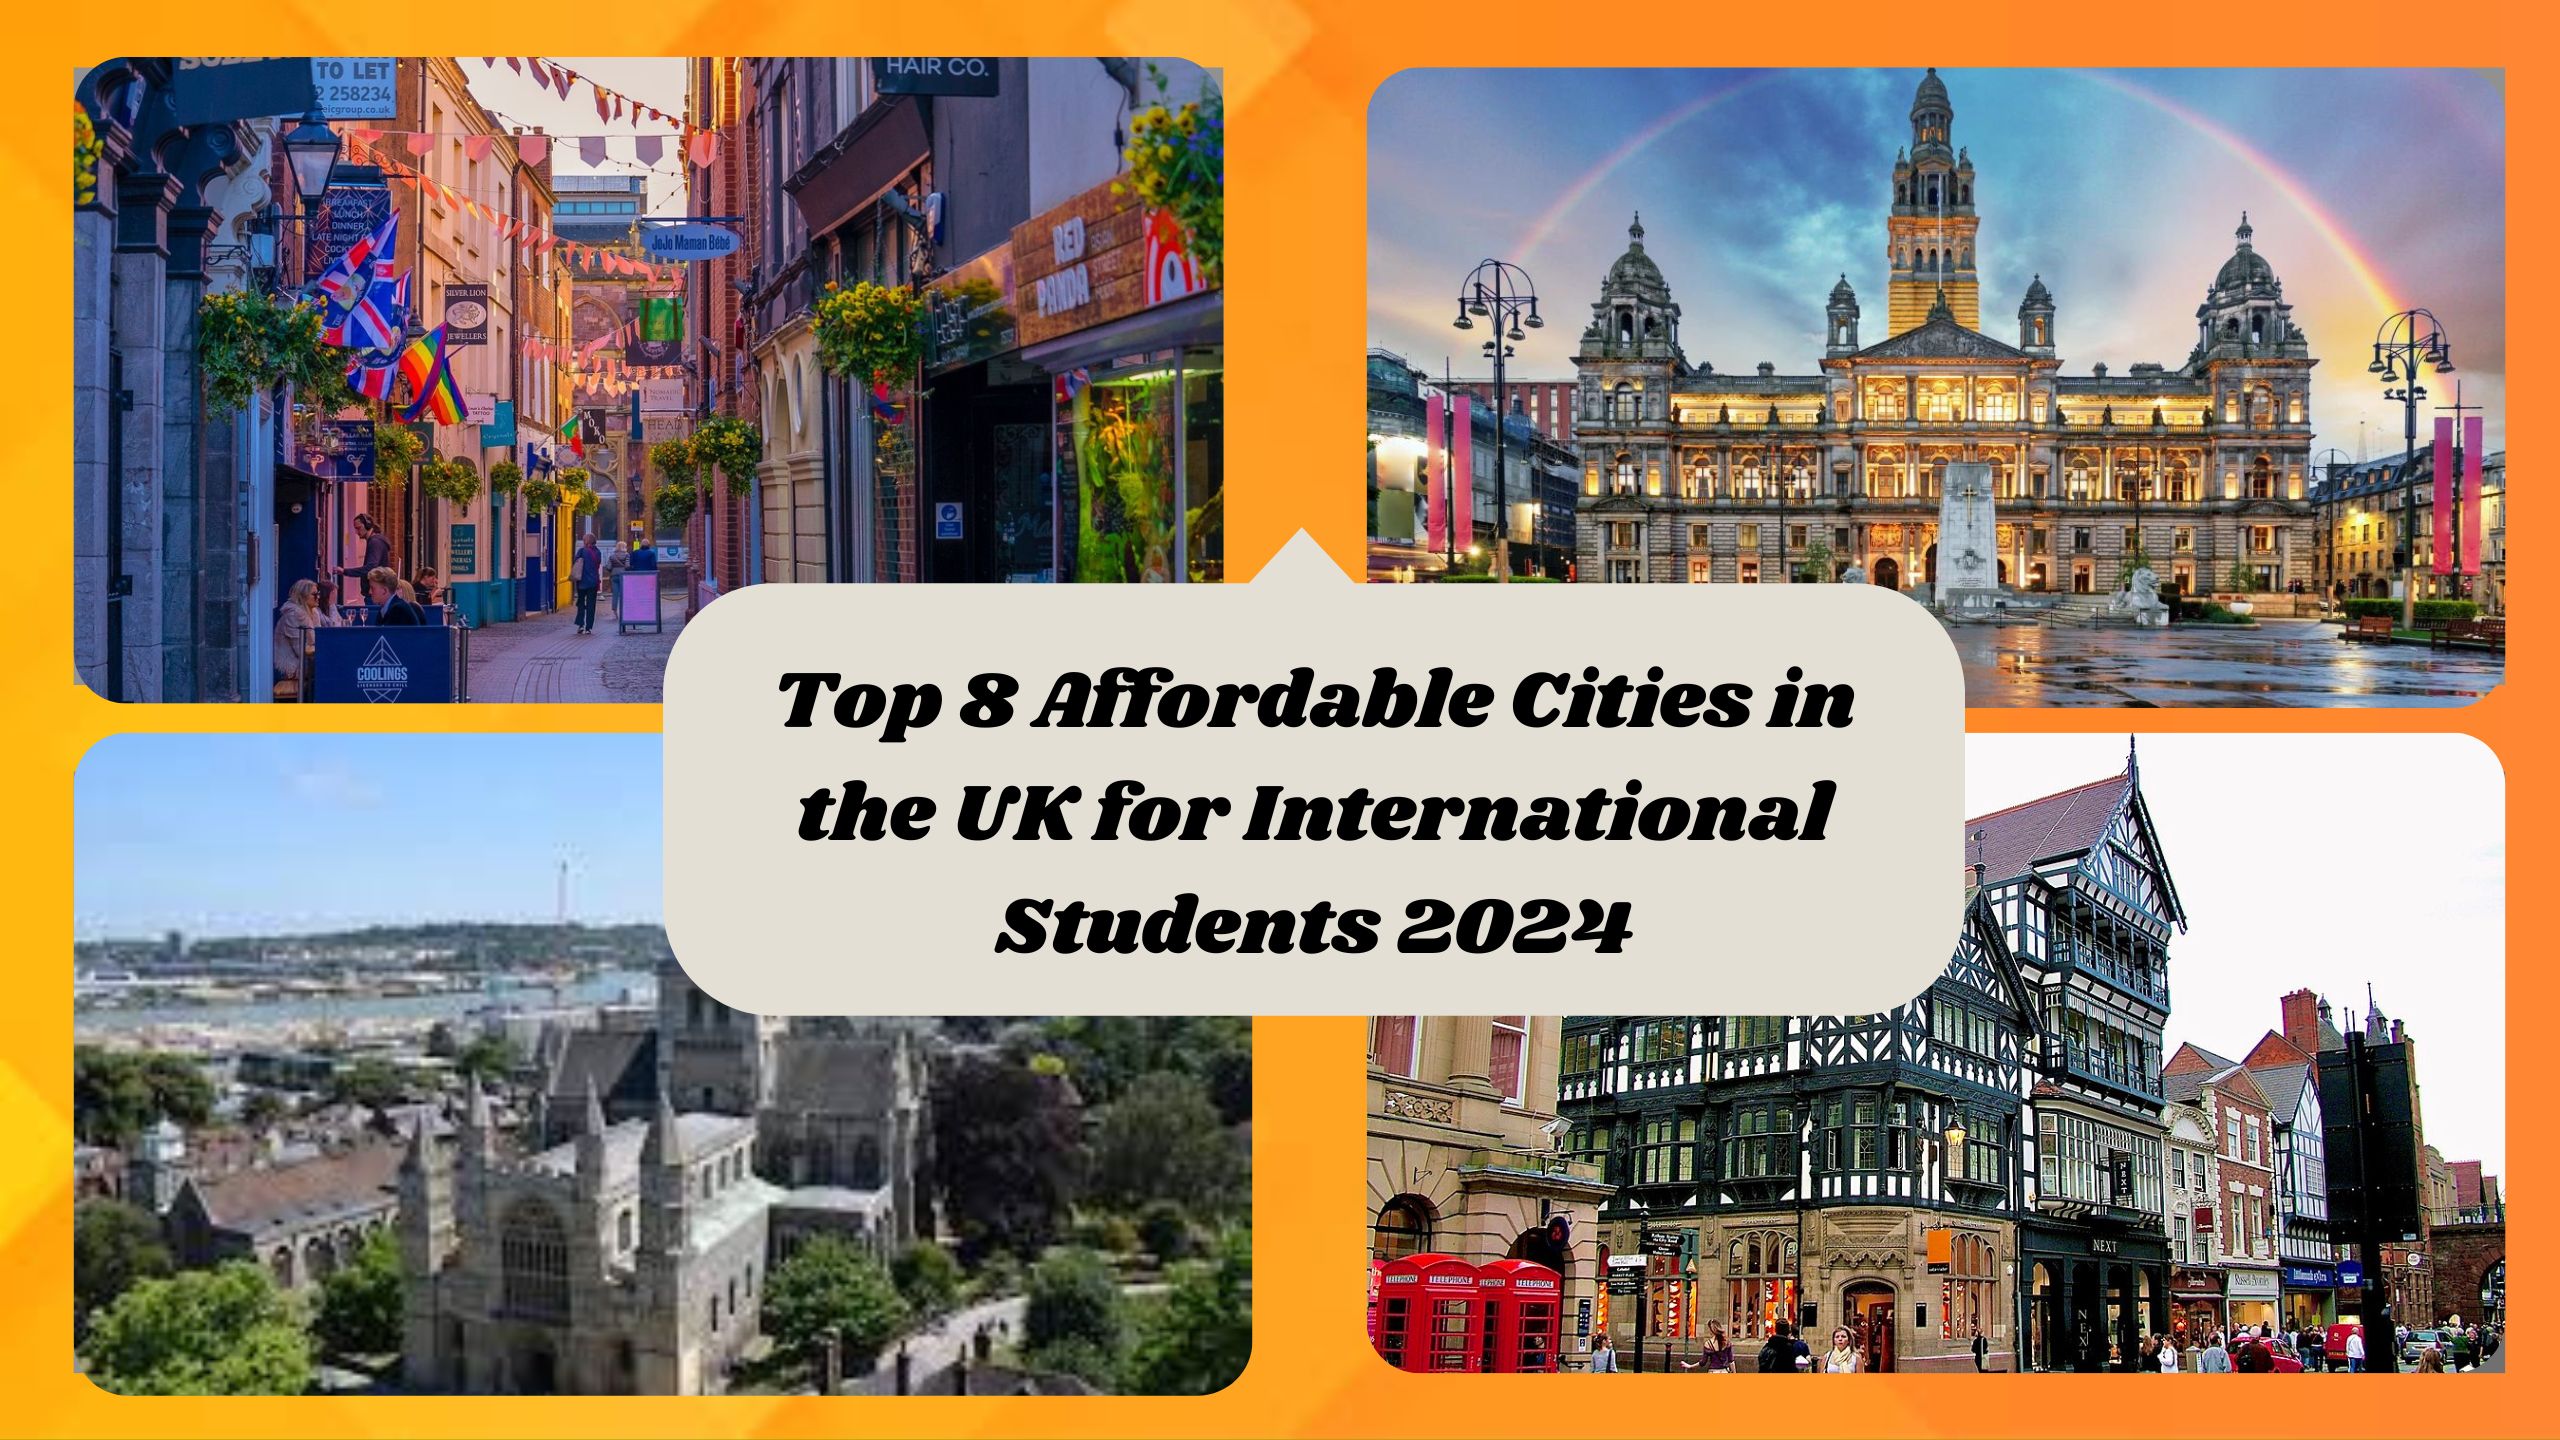 Top 8 Affordable Cities in the UK for International Students 2024